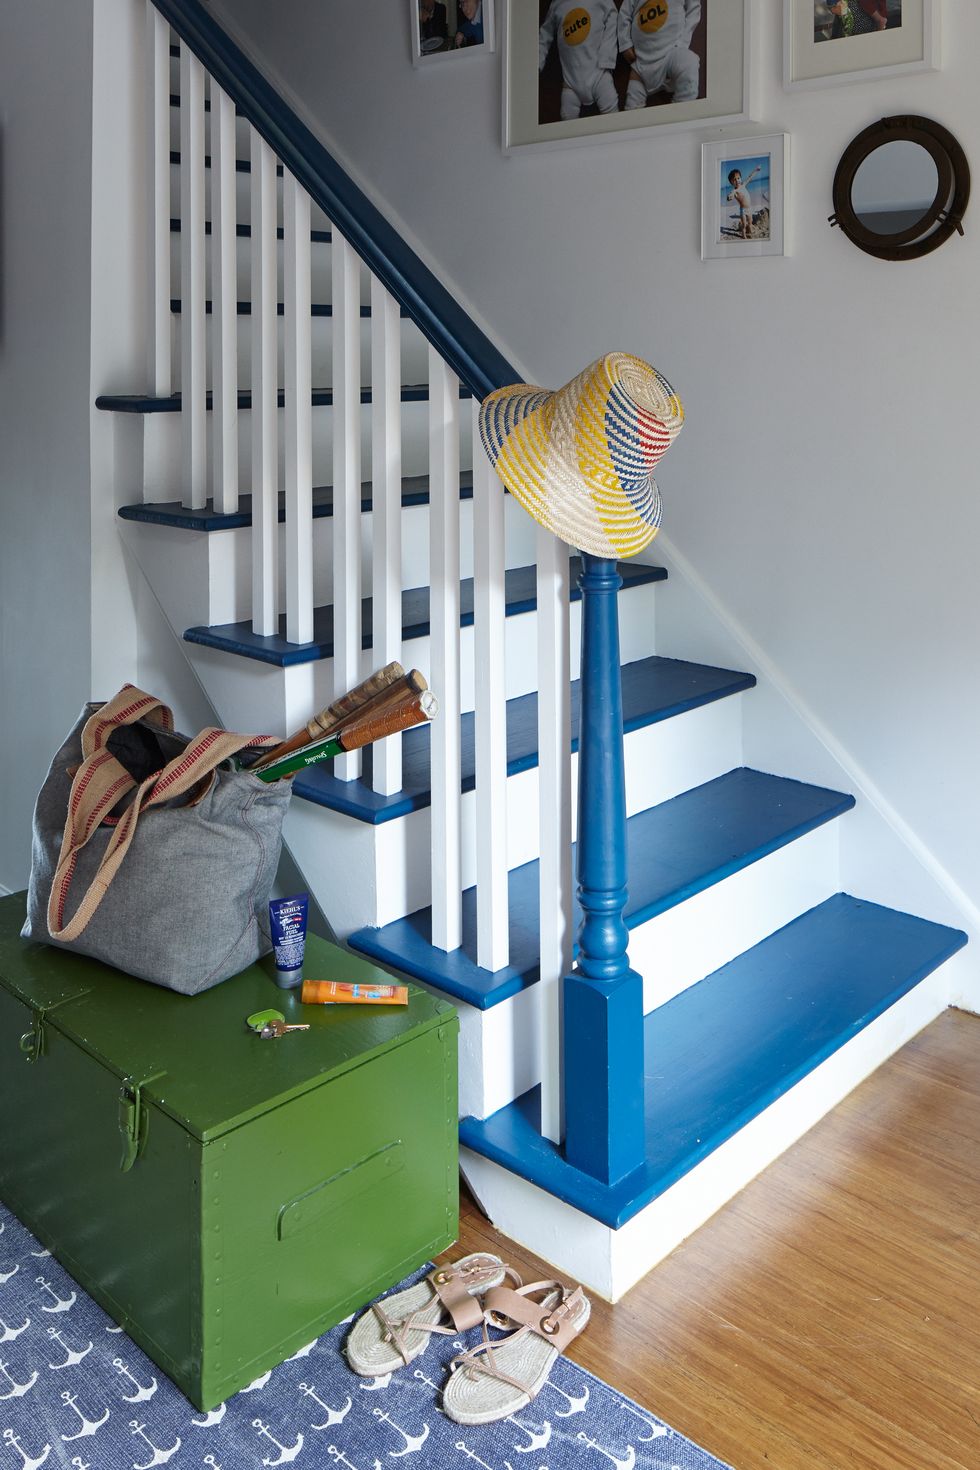 50 Best Staircase Ideas to Decorate Your Home